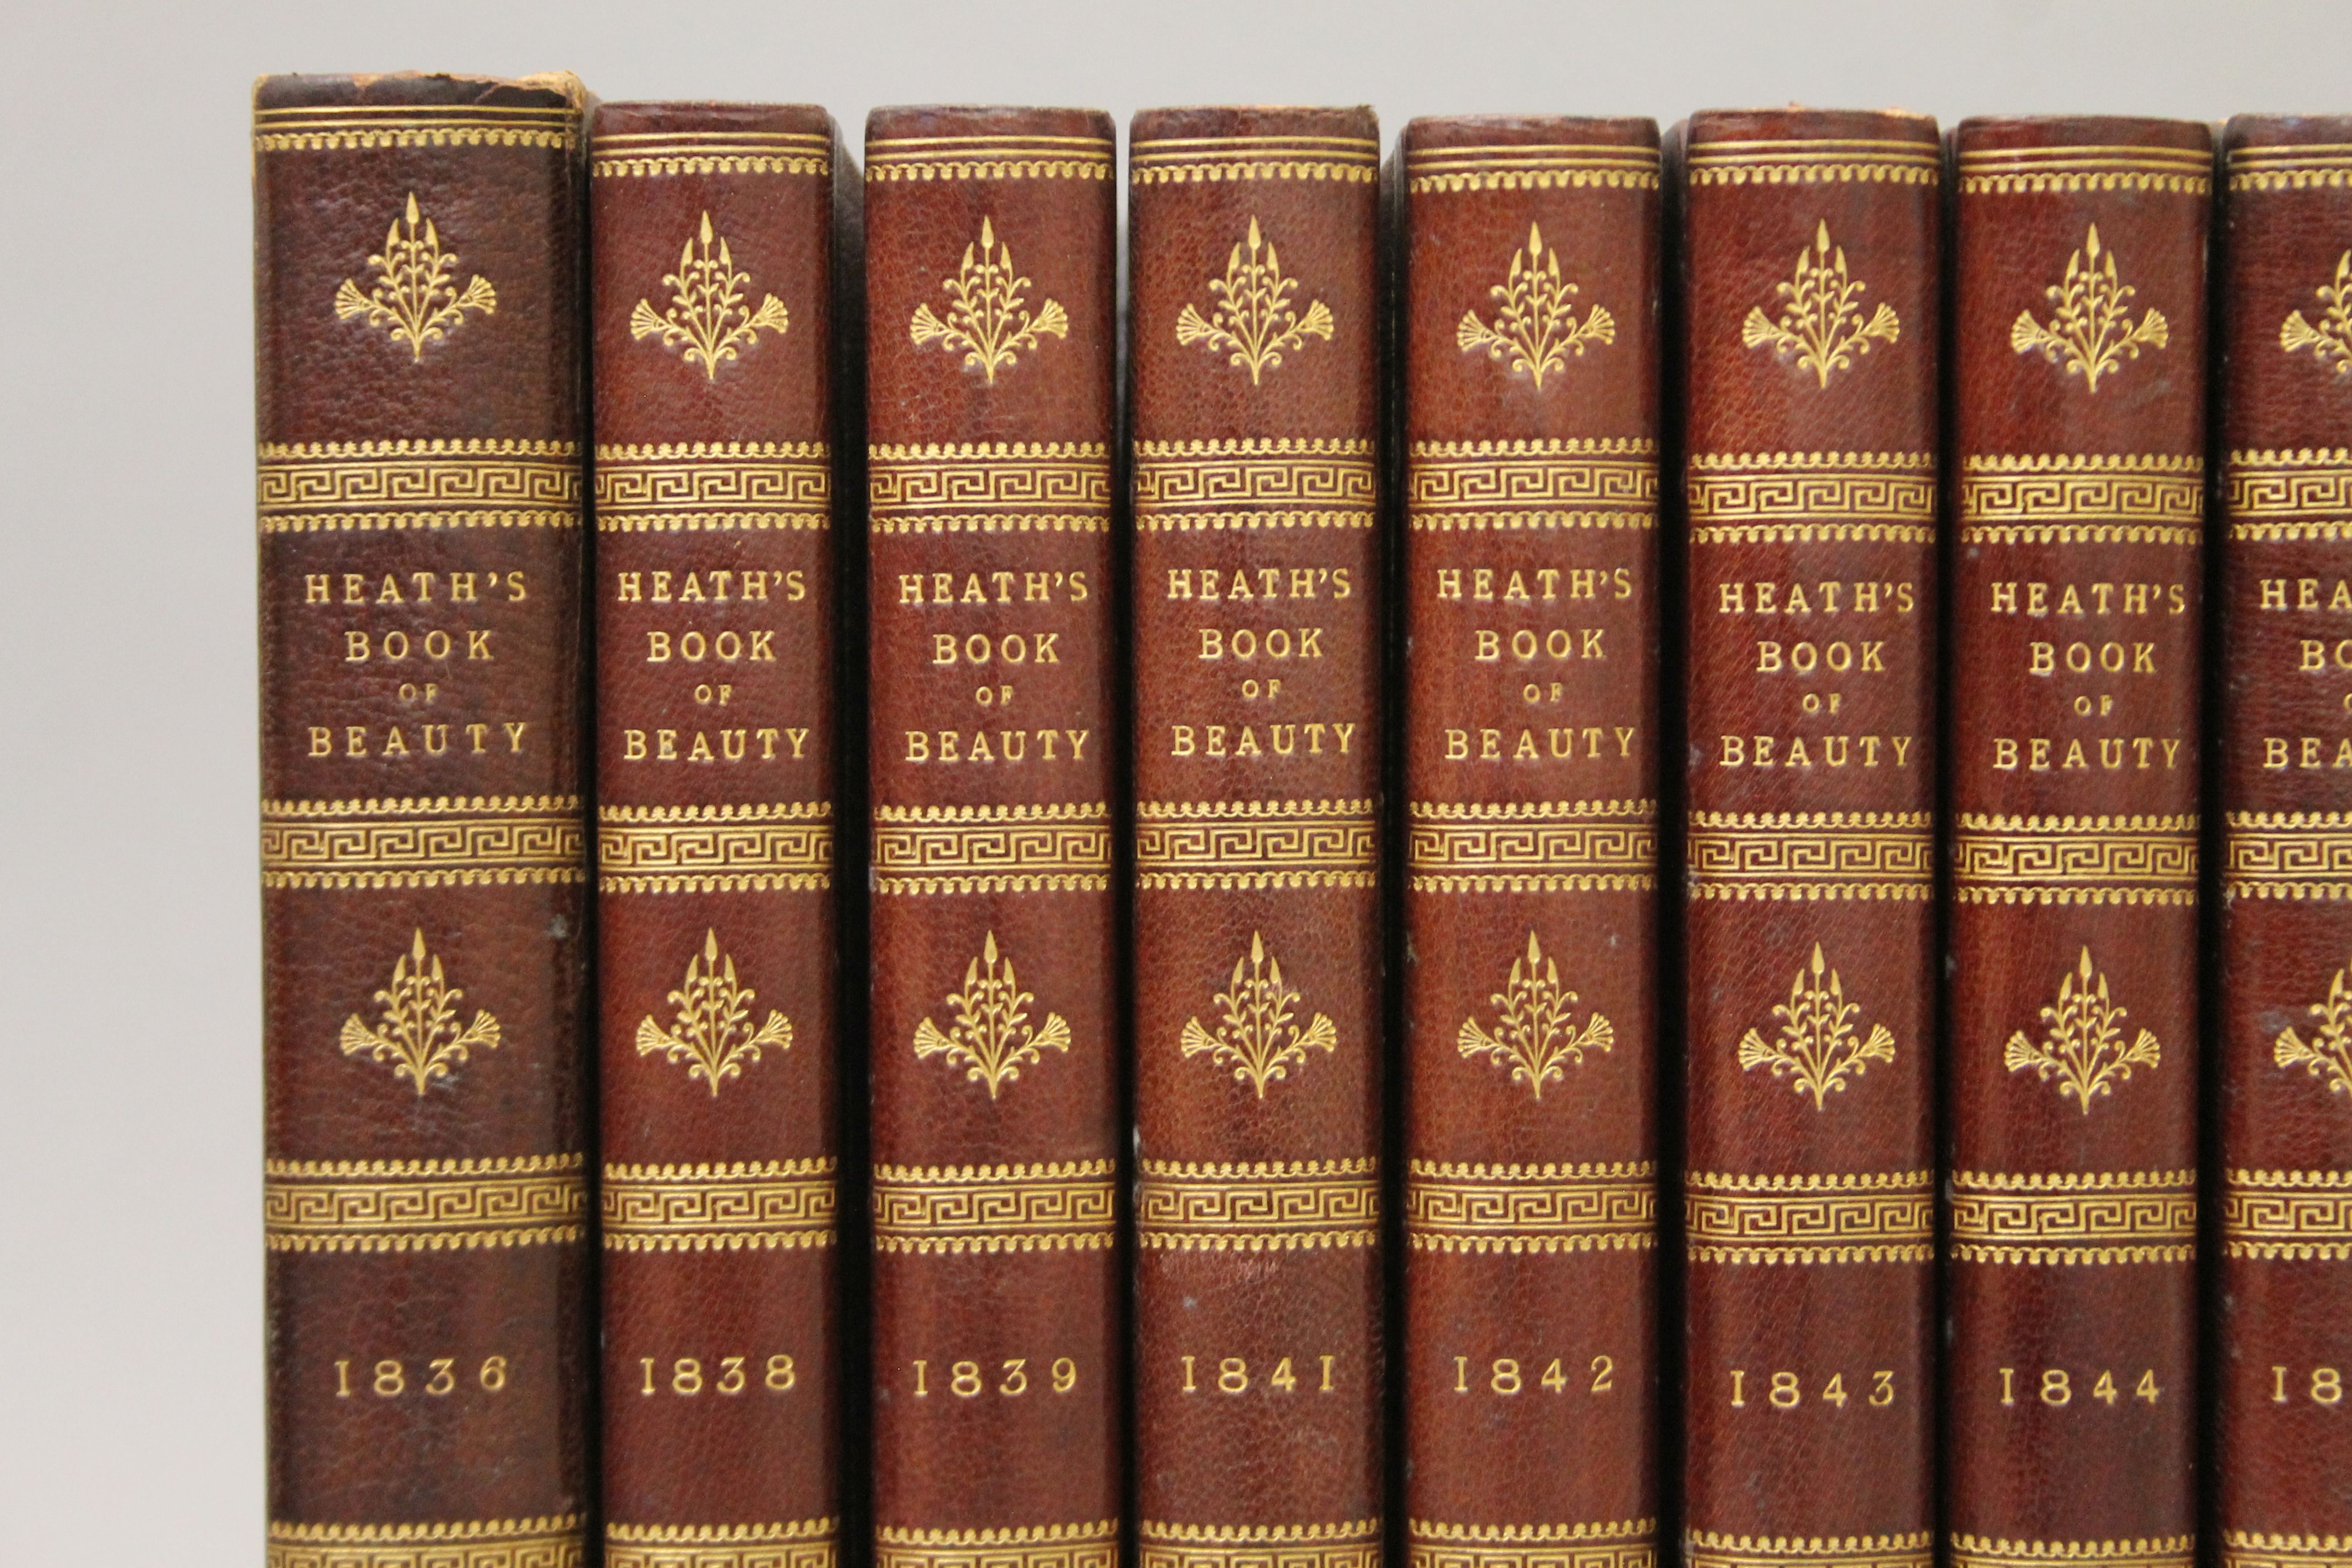 Heath's Book of Beauty for 1836, 1838, 1839, 1841, 1842, 1843, 1844, 1845, 1847, 1848, 1849, - Image 2 of 11